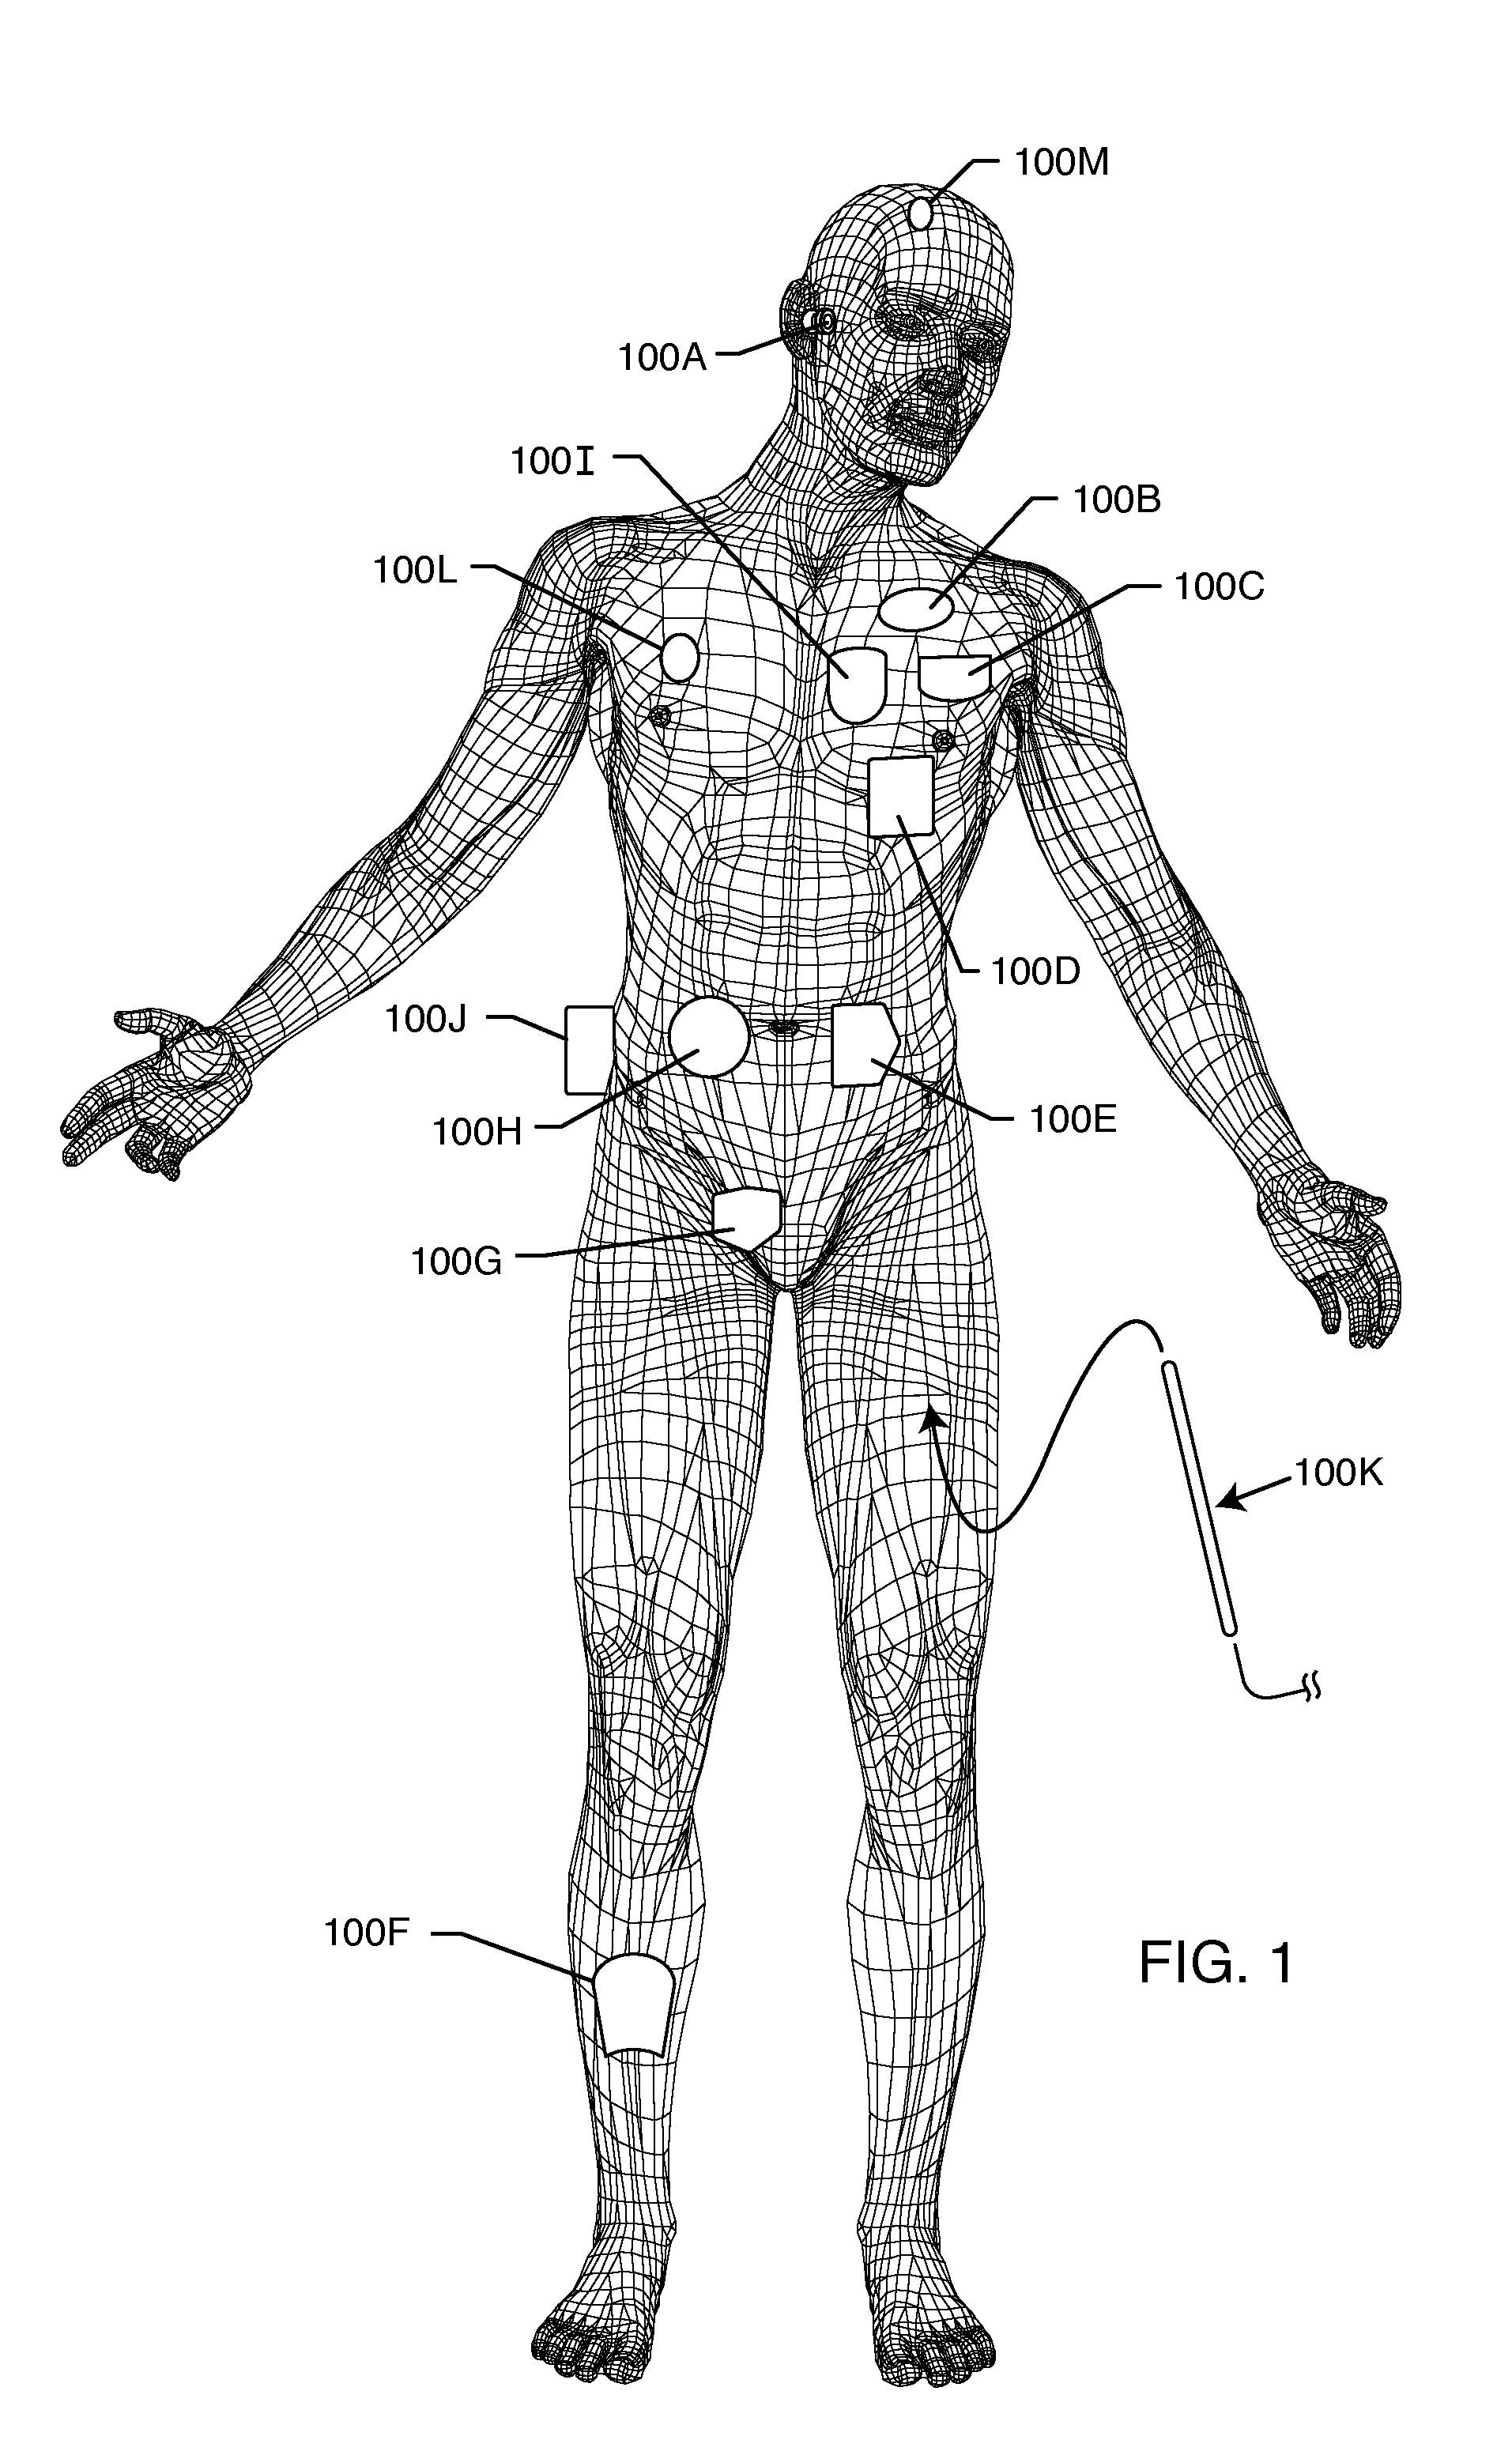 Multiplexer for selection of an MRI compatible band stop filter or switch placed in series with a particular therapy electrode of an active implantable medical device